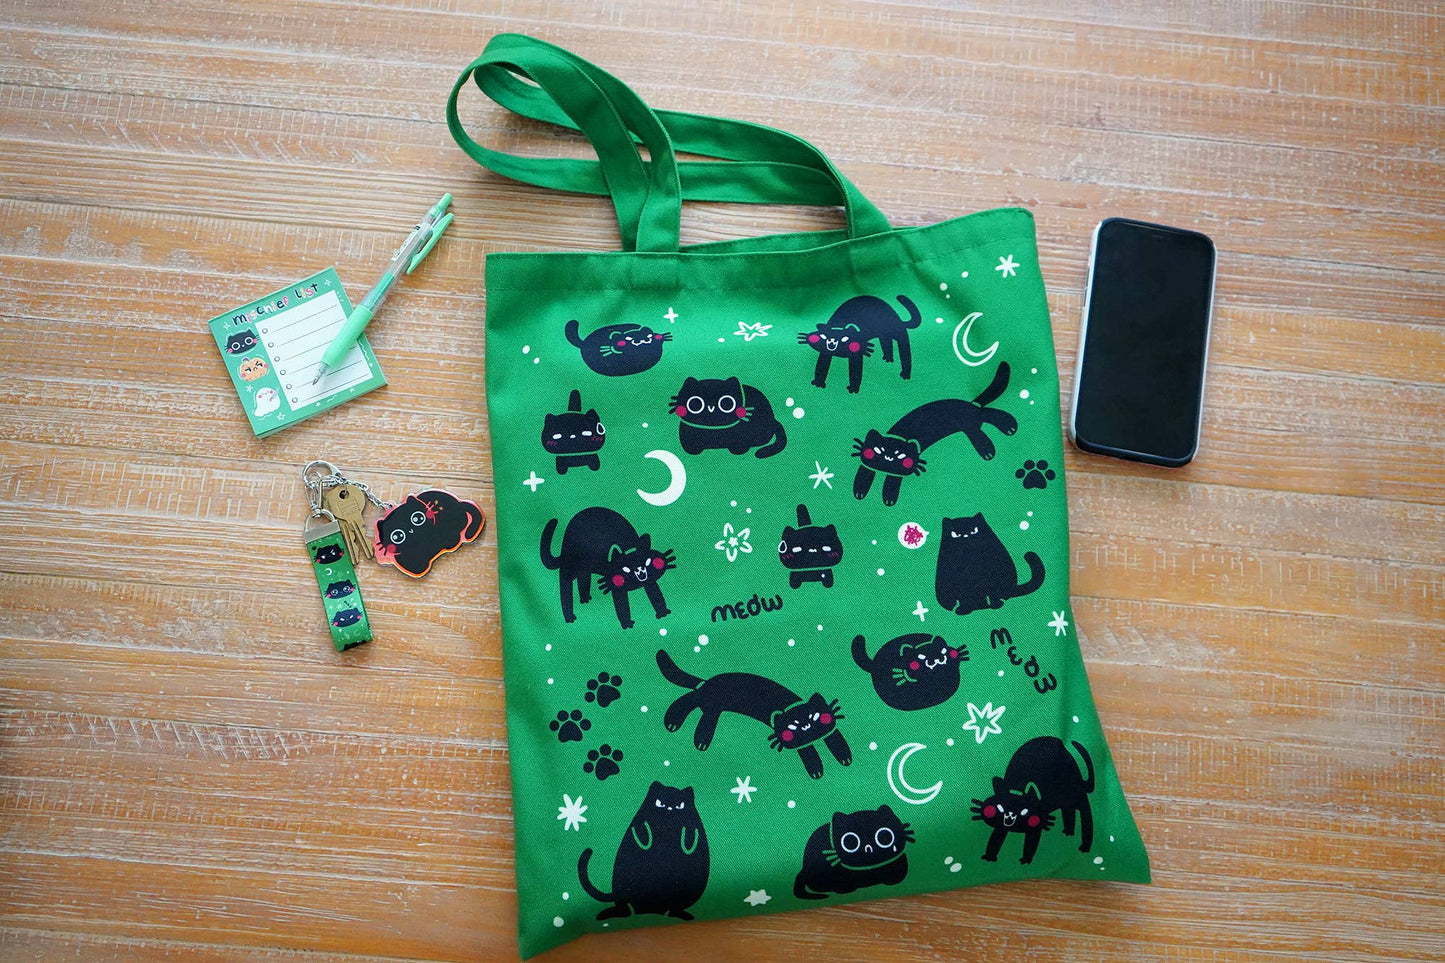 Black Cats on Green Tote Bag